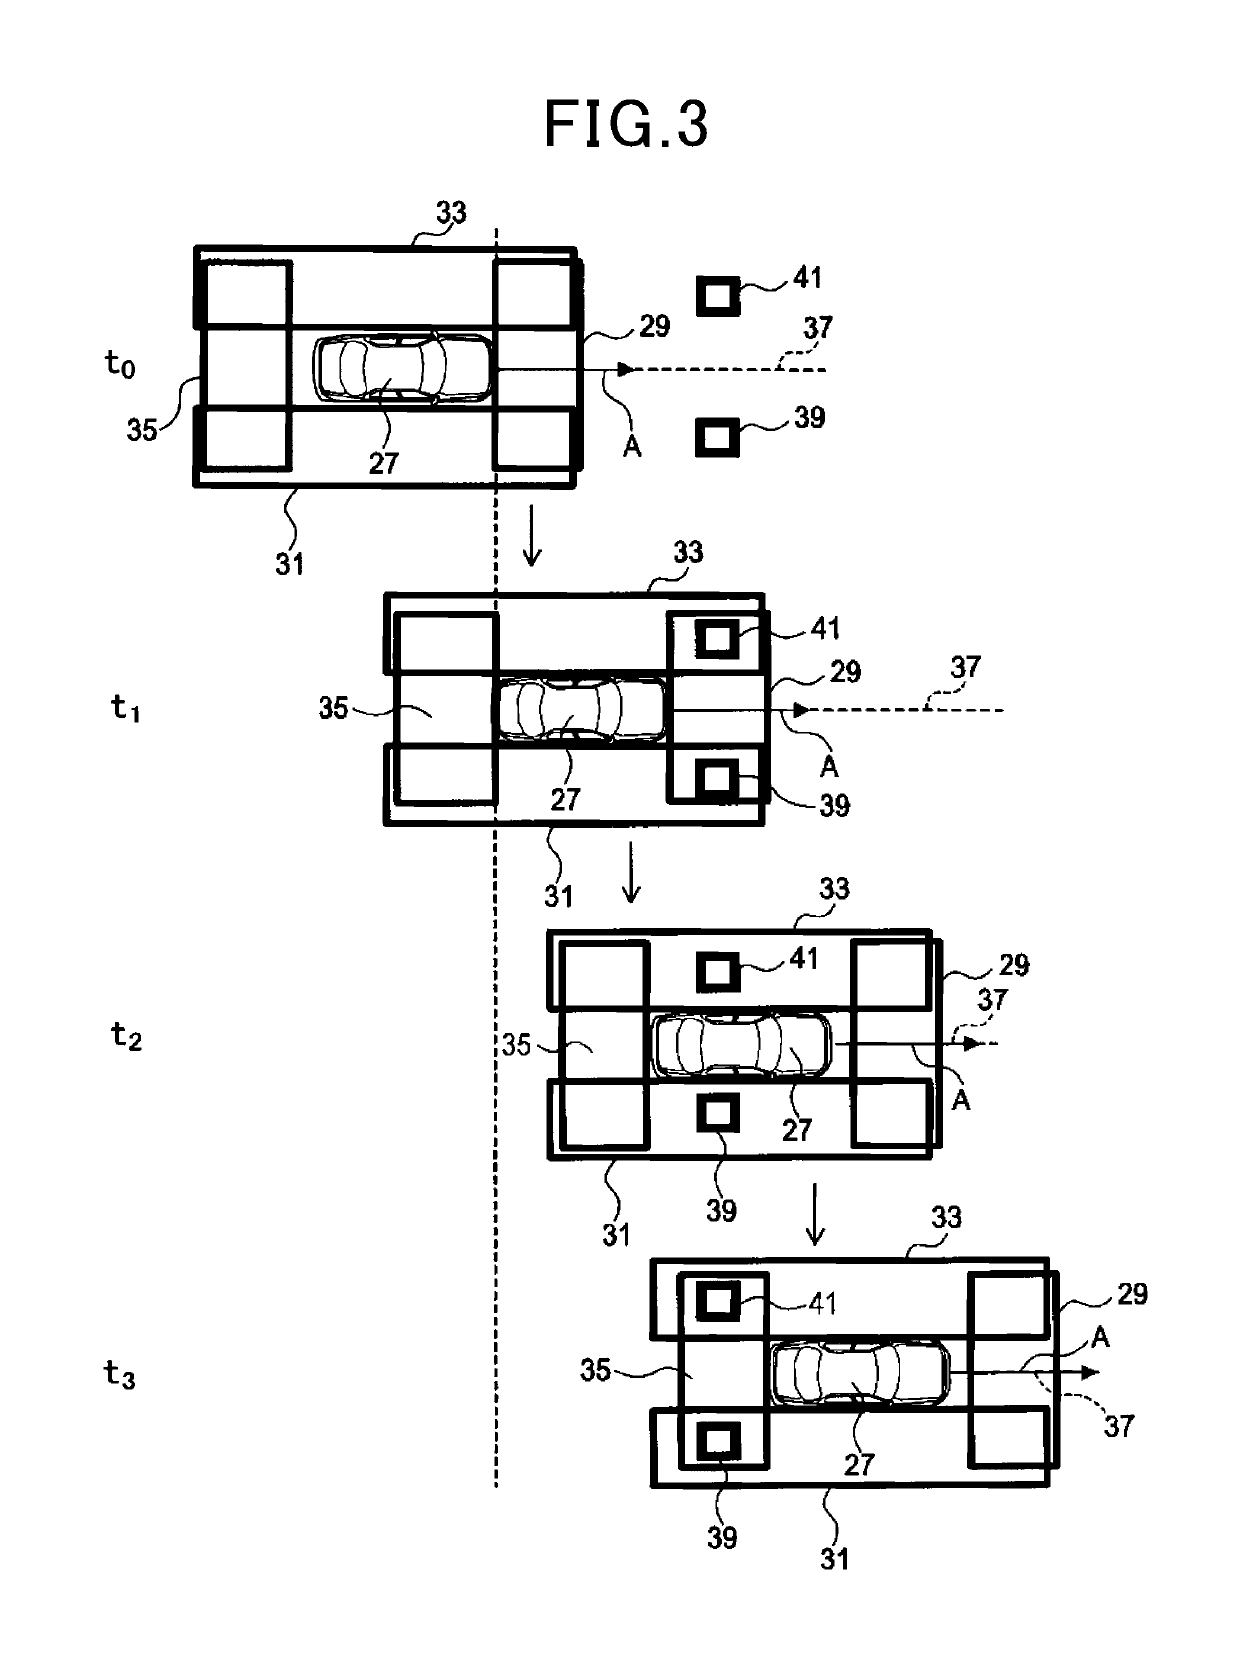 Calibration apparatus for onboard camera and calibration method for onboard camera